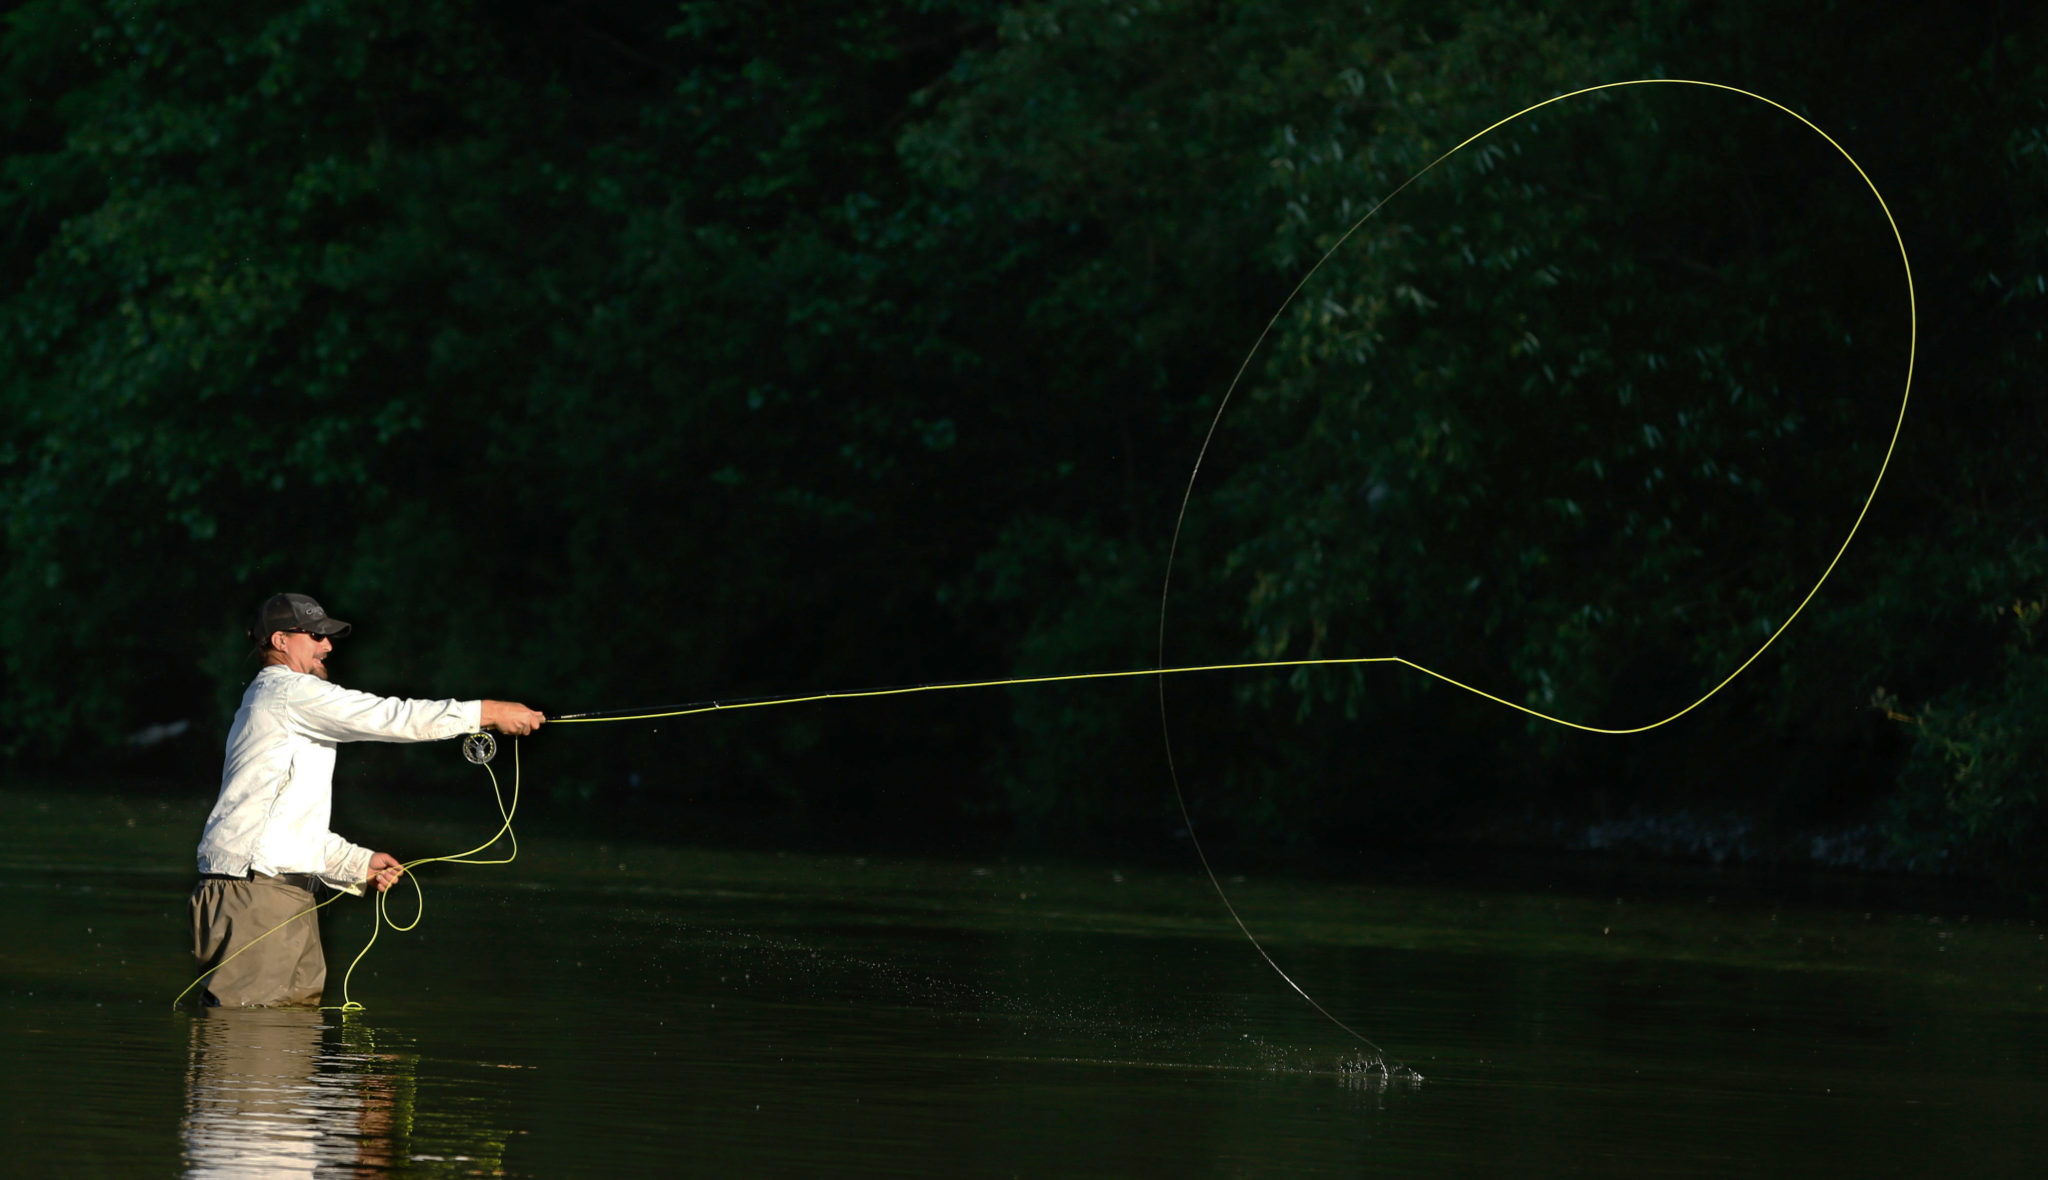 Joe Schriner of Cloverdale casts his line towards the opposite bank while fly fishing in the Russian River. (Alvin Jornada)